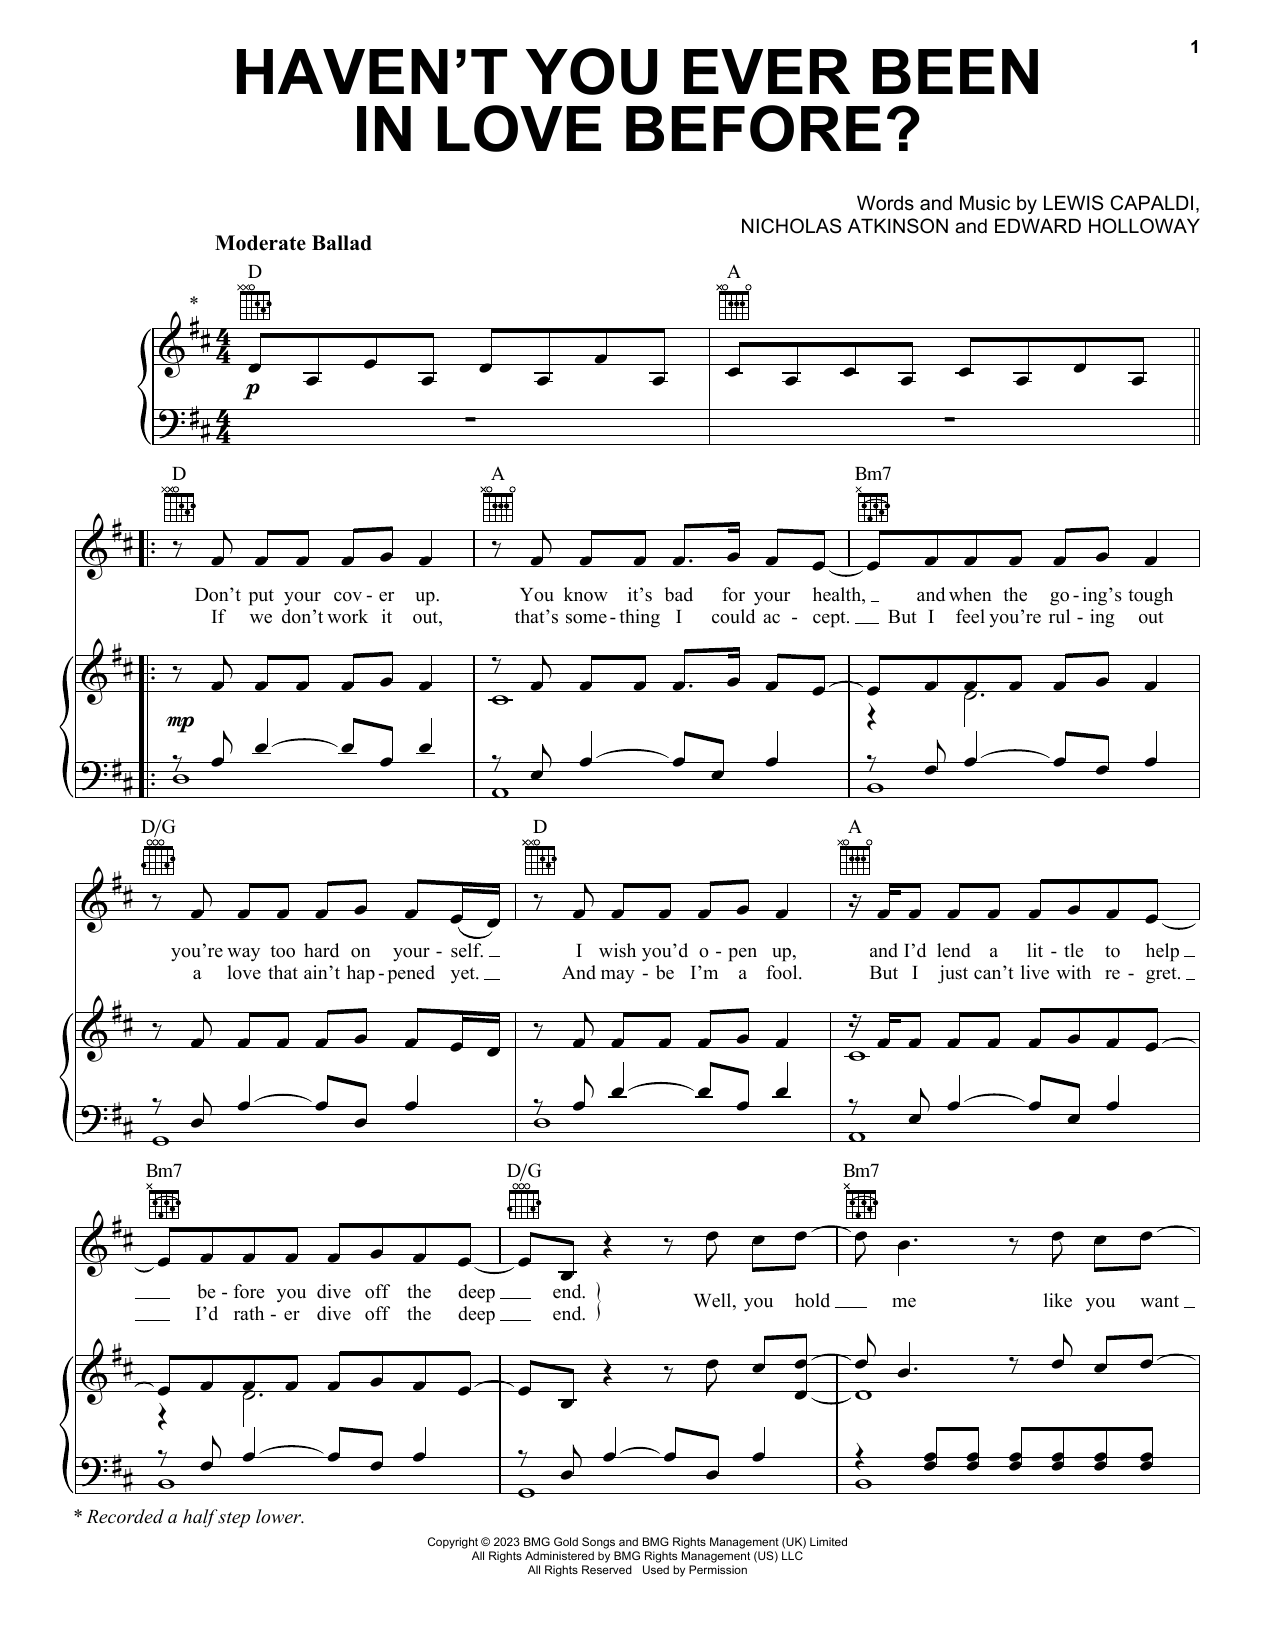 Download Lewis Capaldi Haven't You Ever Been In Love Before? Sheet Music